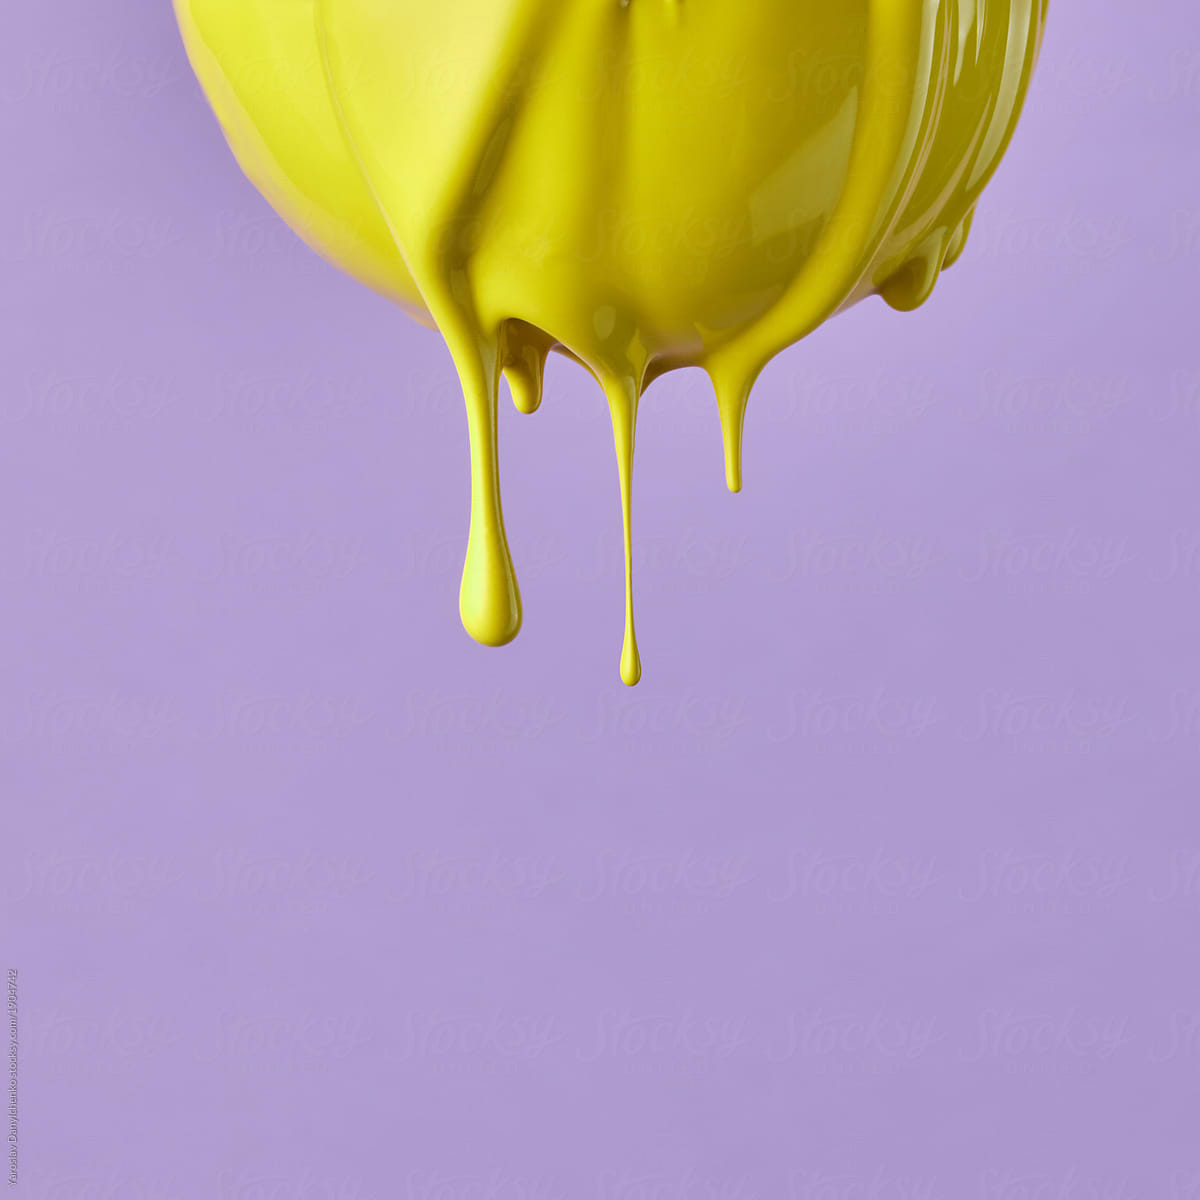 Yellow paint drips from a lemon on a purple background